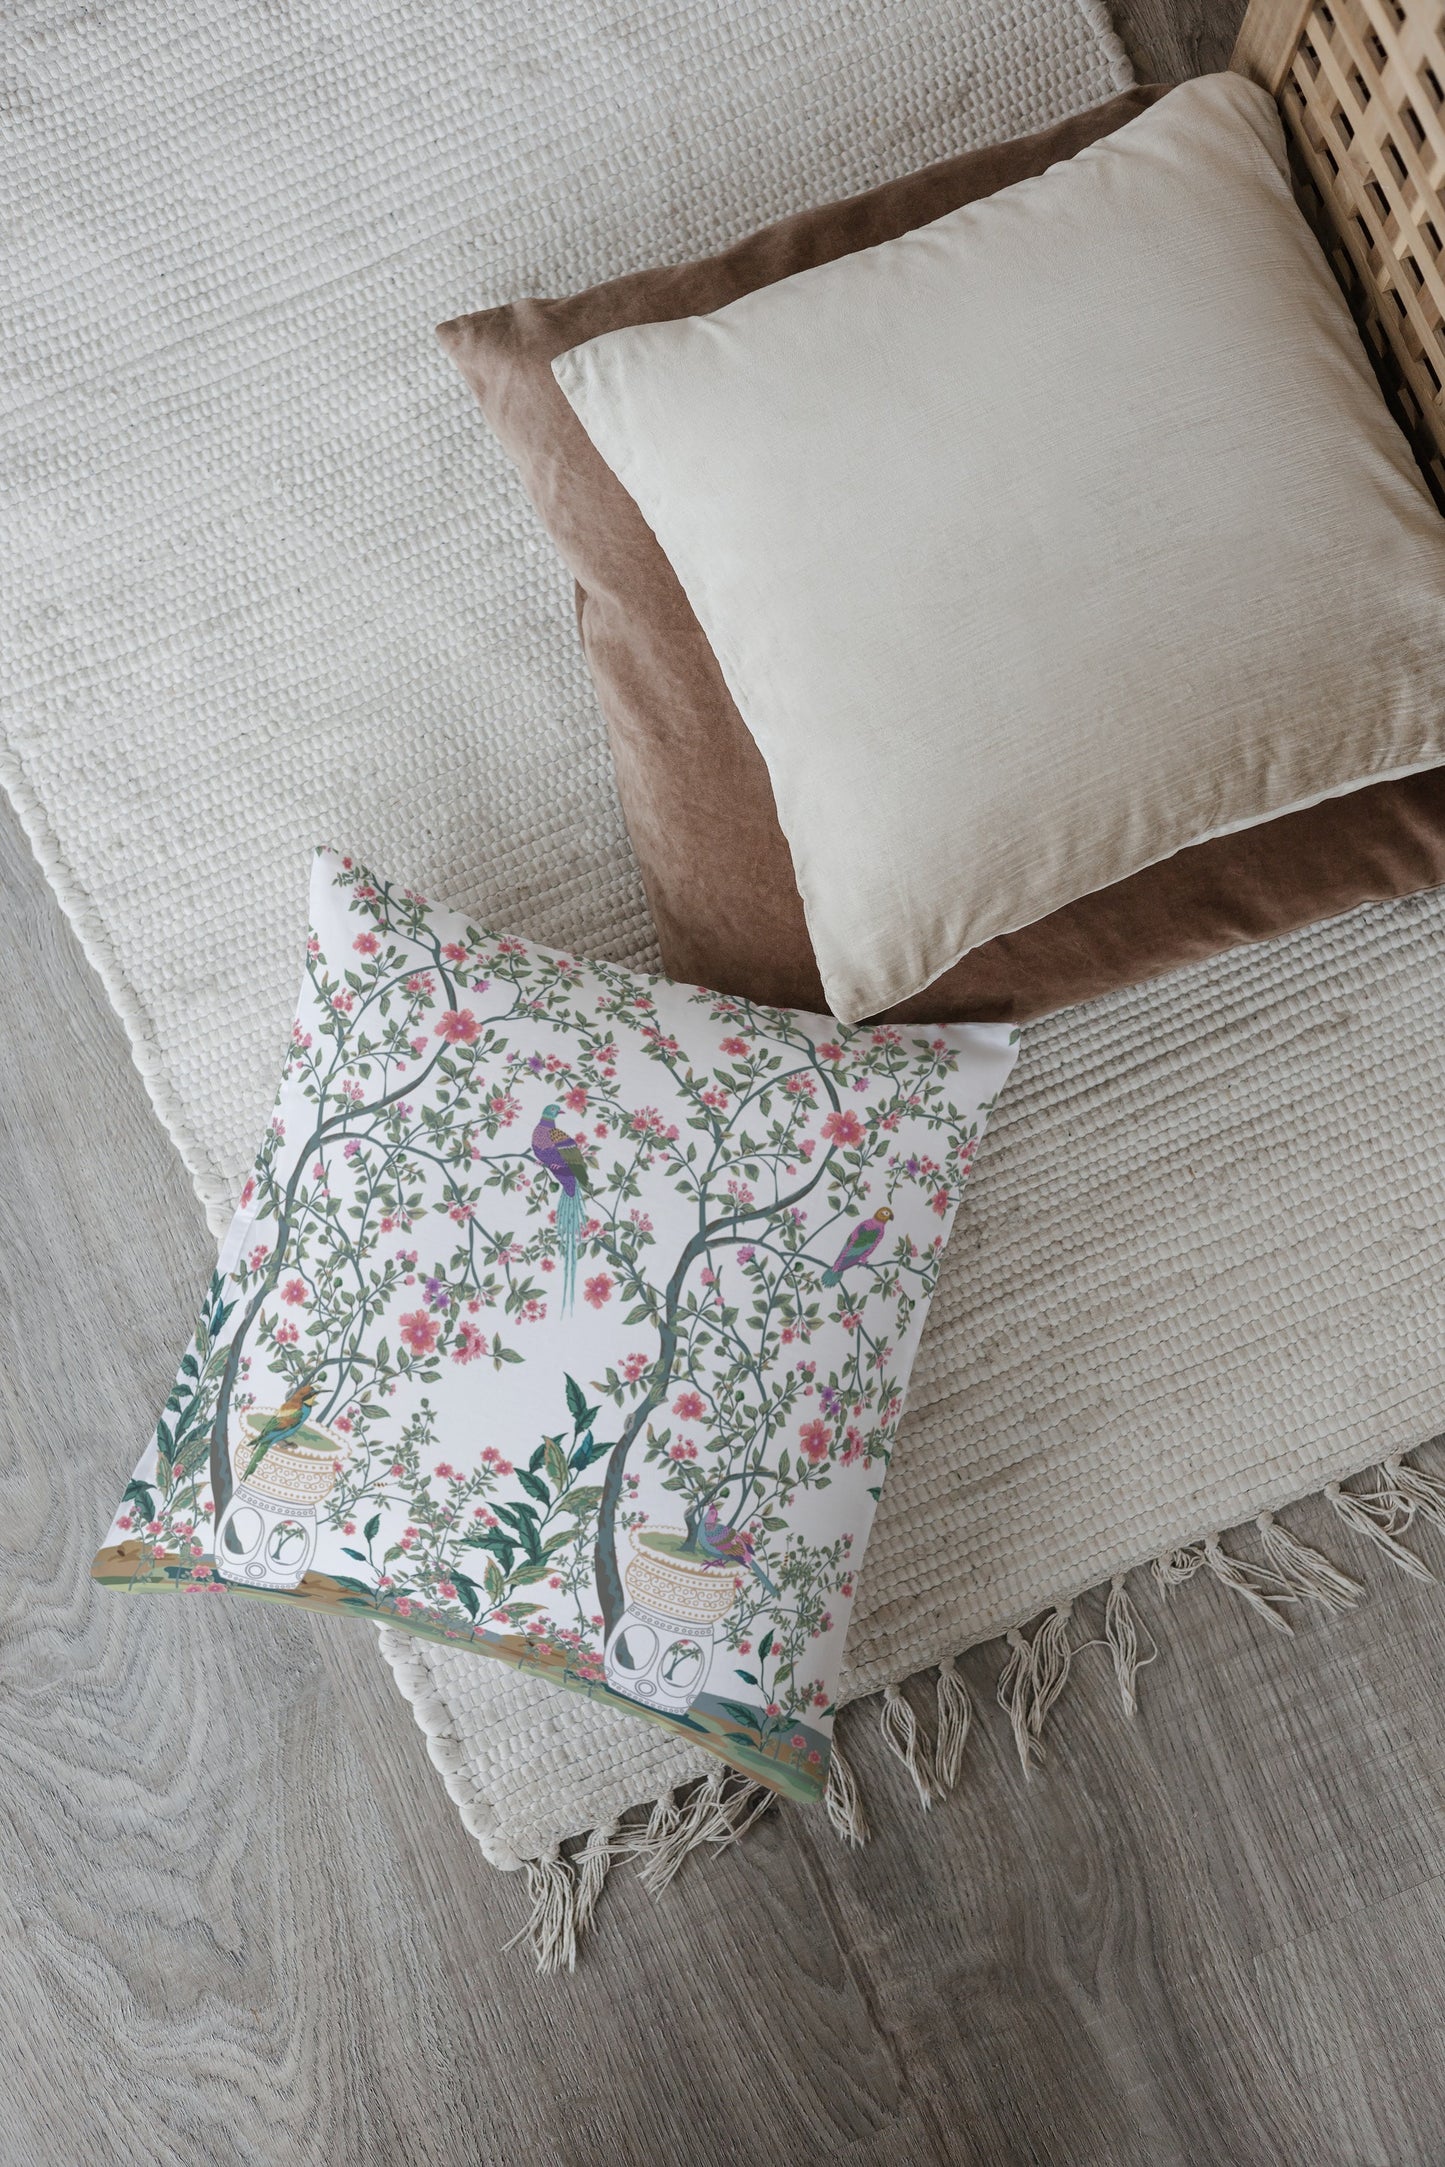 Chinoiserie Outdoor Pillows Pink & White